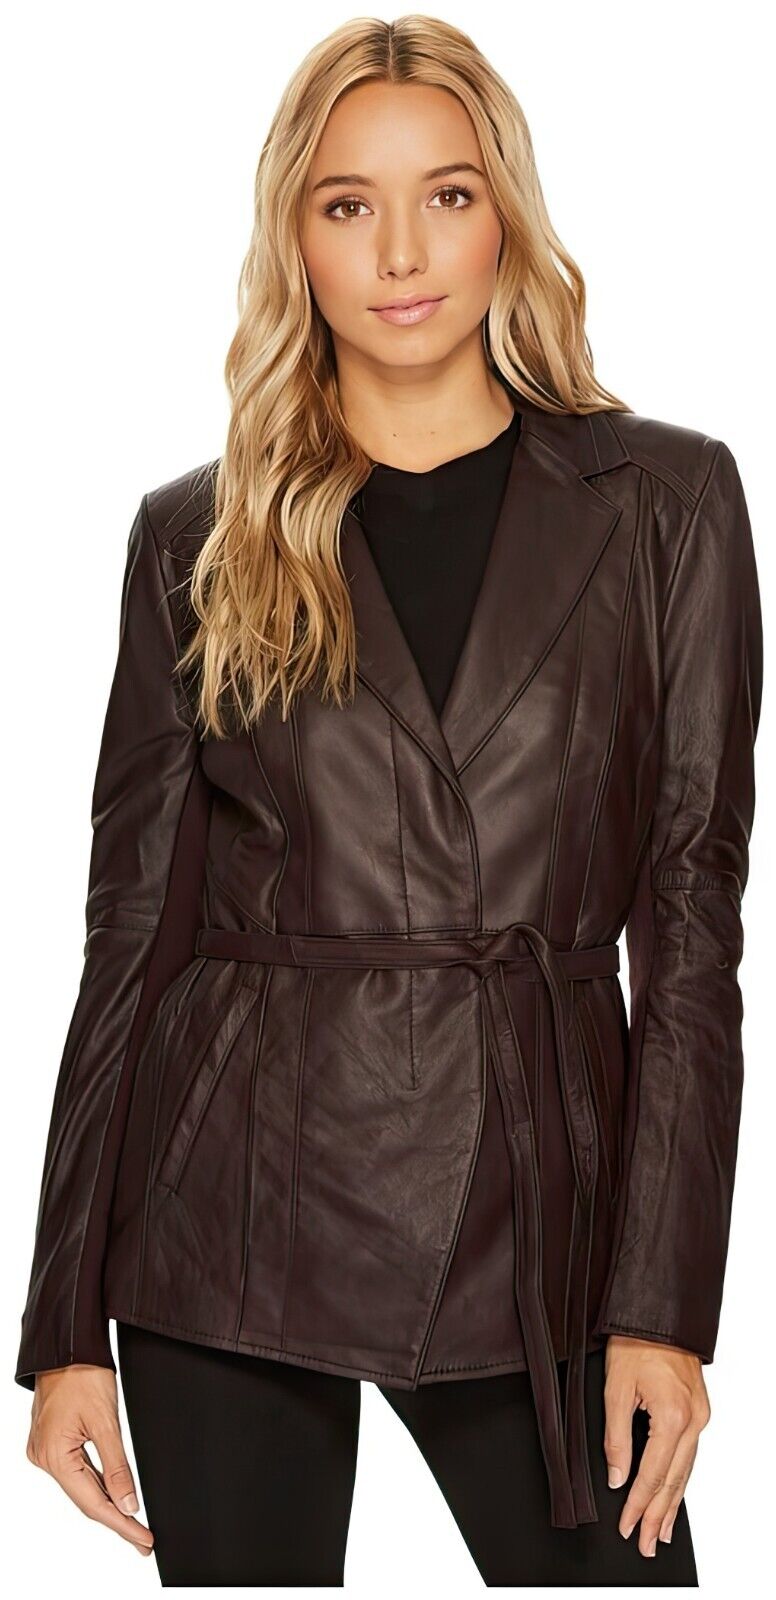 A woman wearing a stylish MARC NEW YORK ANDREW MARC Farley Belted Luxurious Genuine Leather Burgundy Jacket with a belt and a black top.